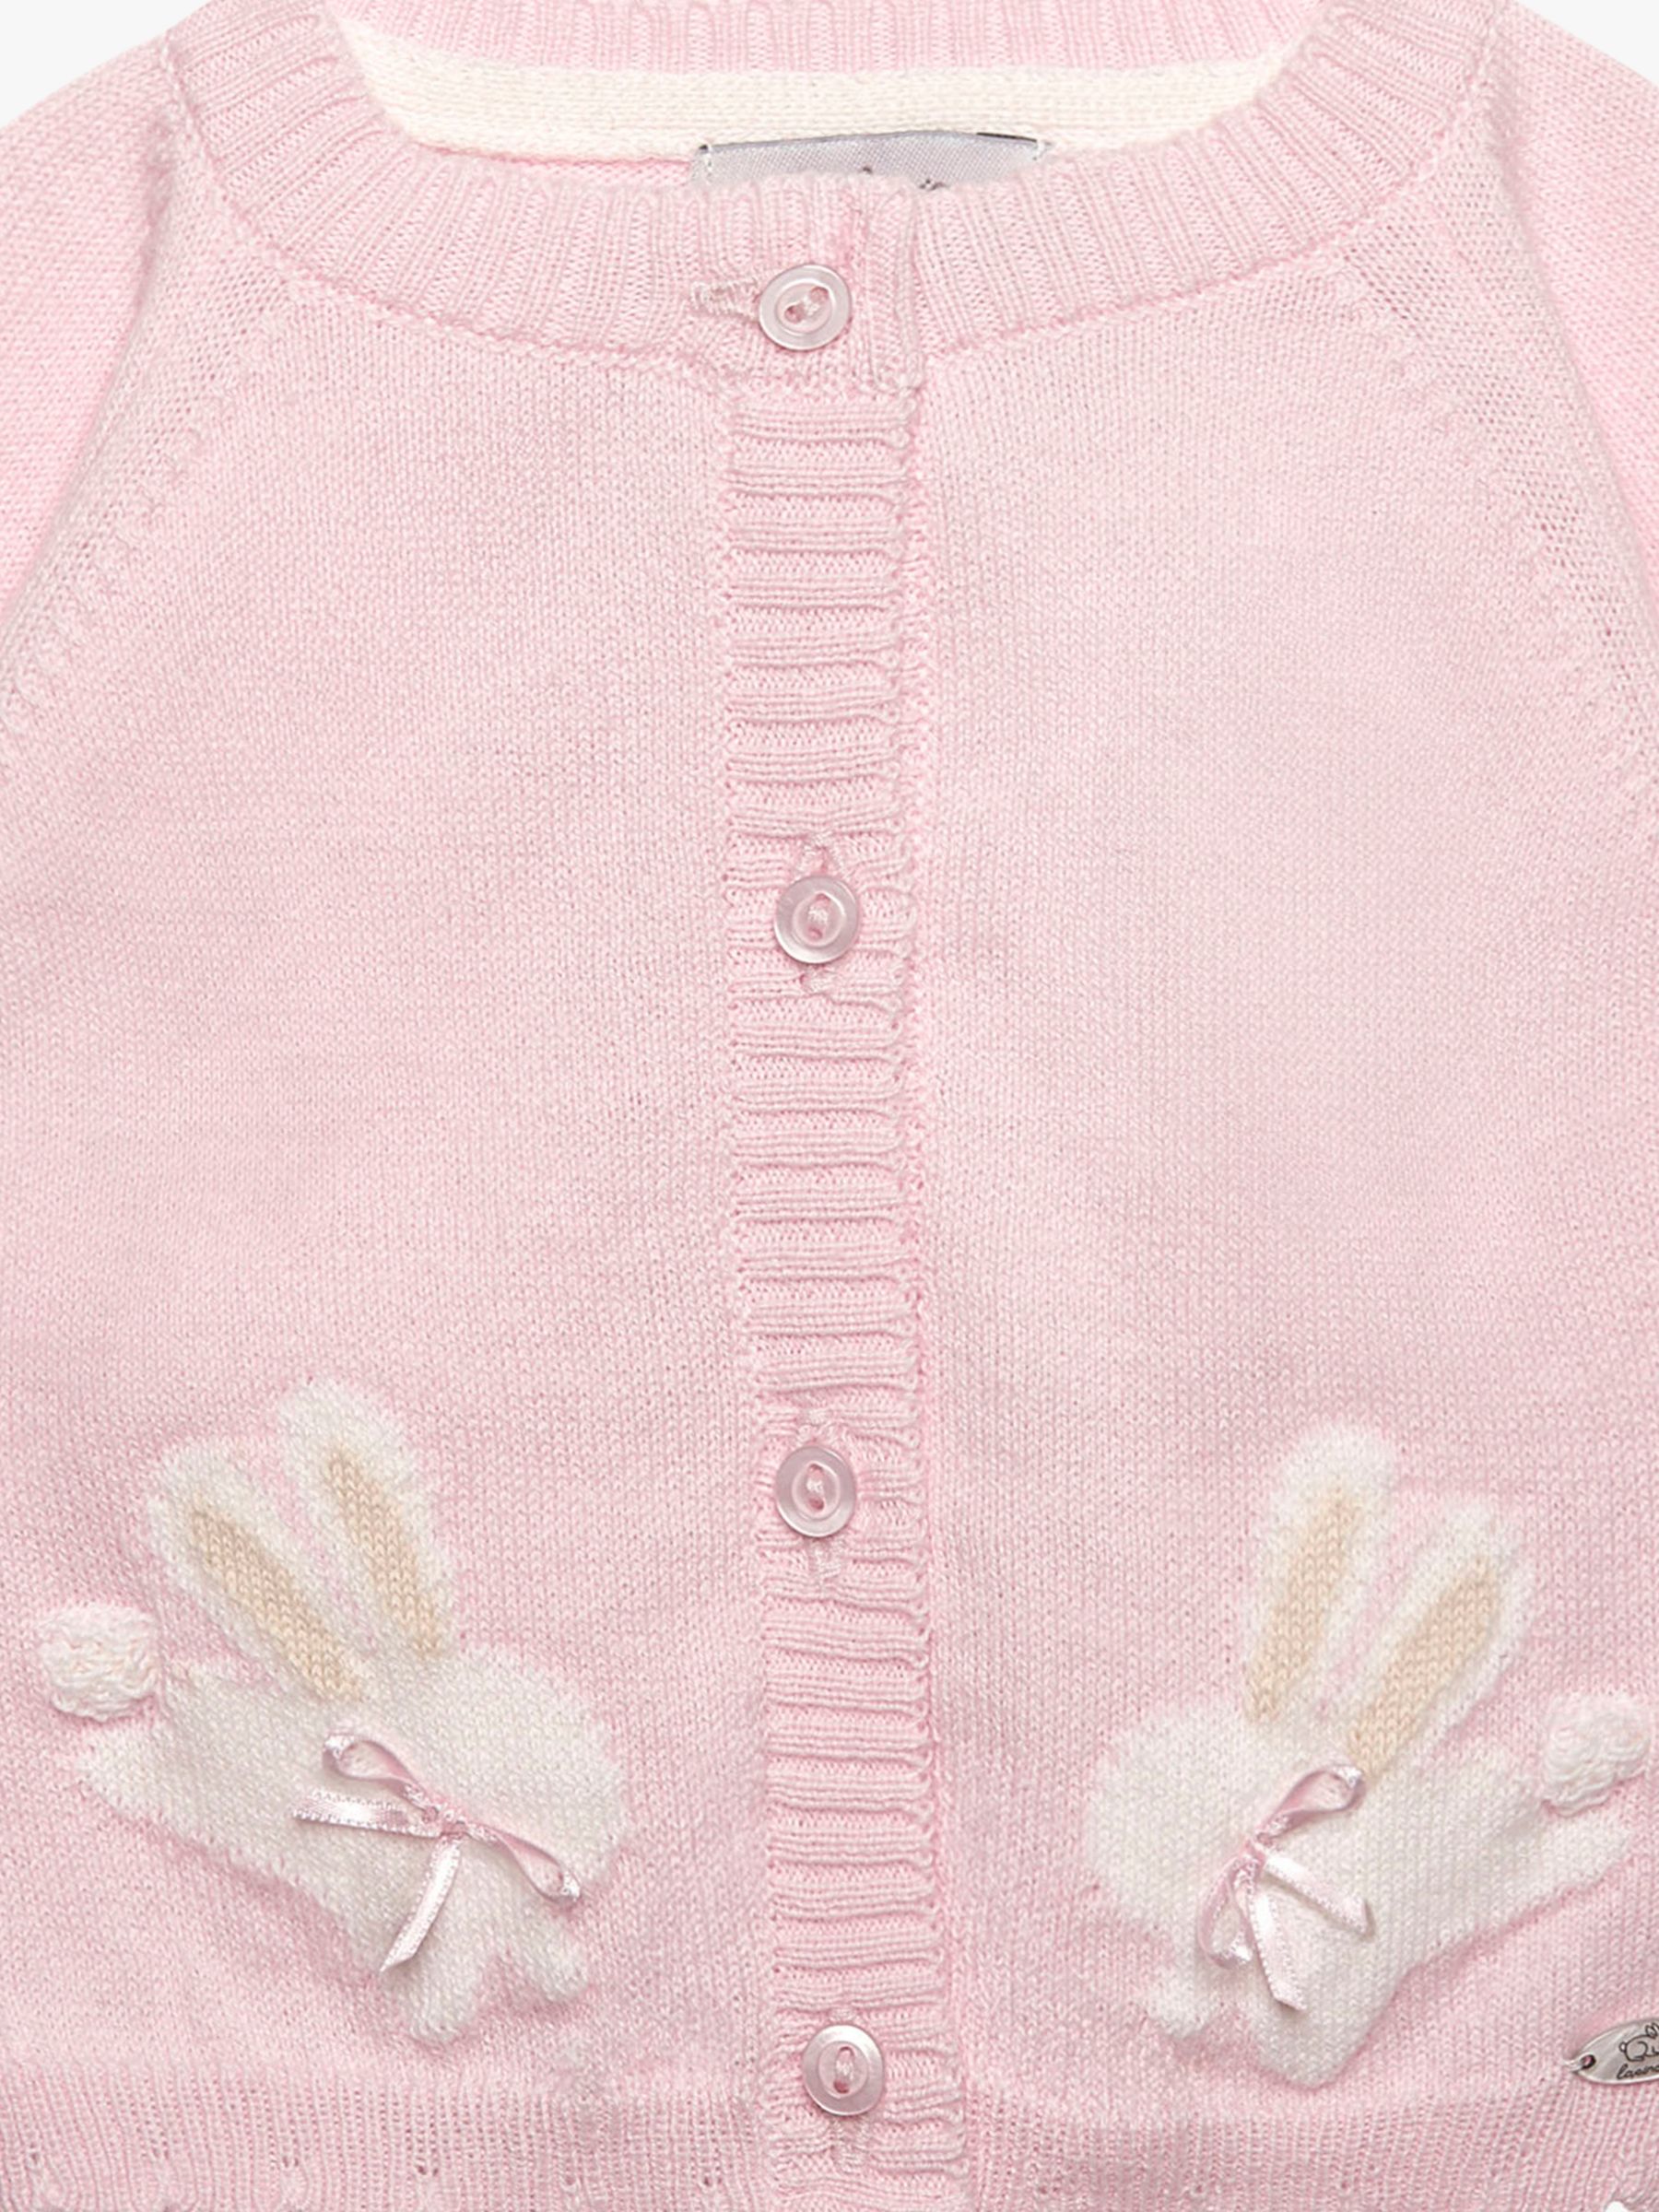 Trotters Baby Wool Blend Flopsy Bunny Cardigan, Pale Pink, 1-3 months